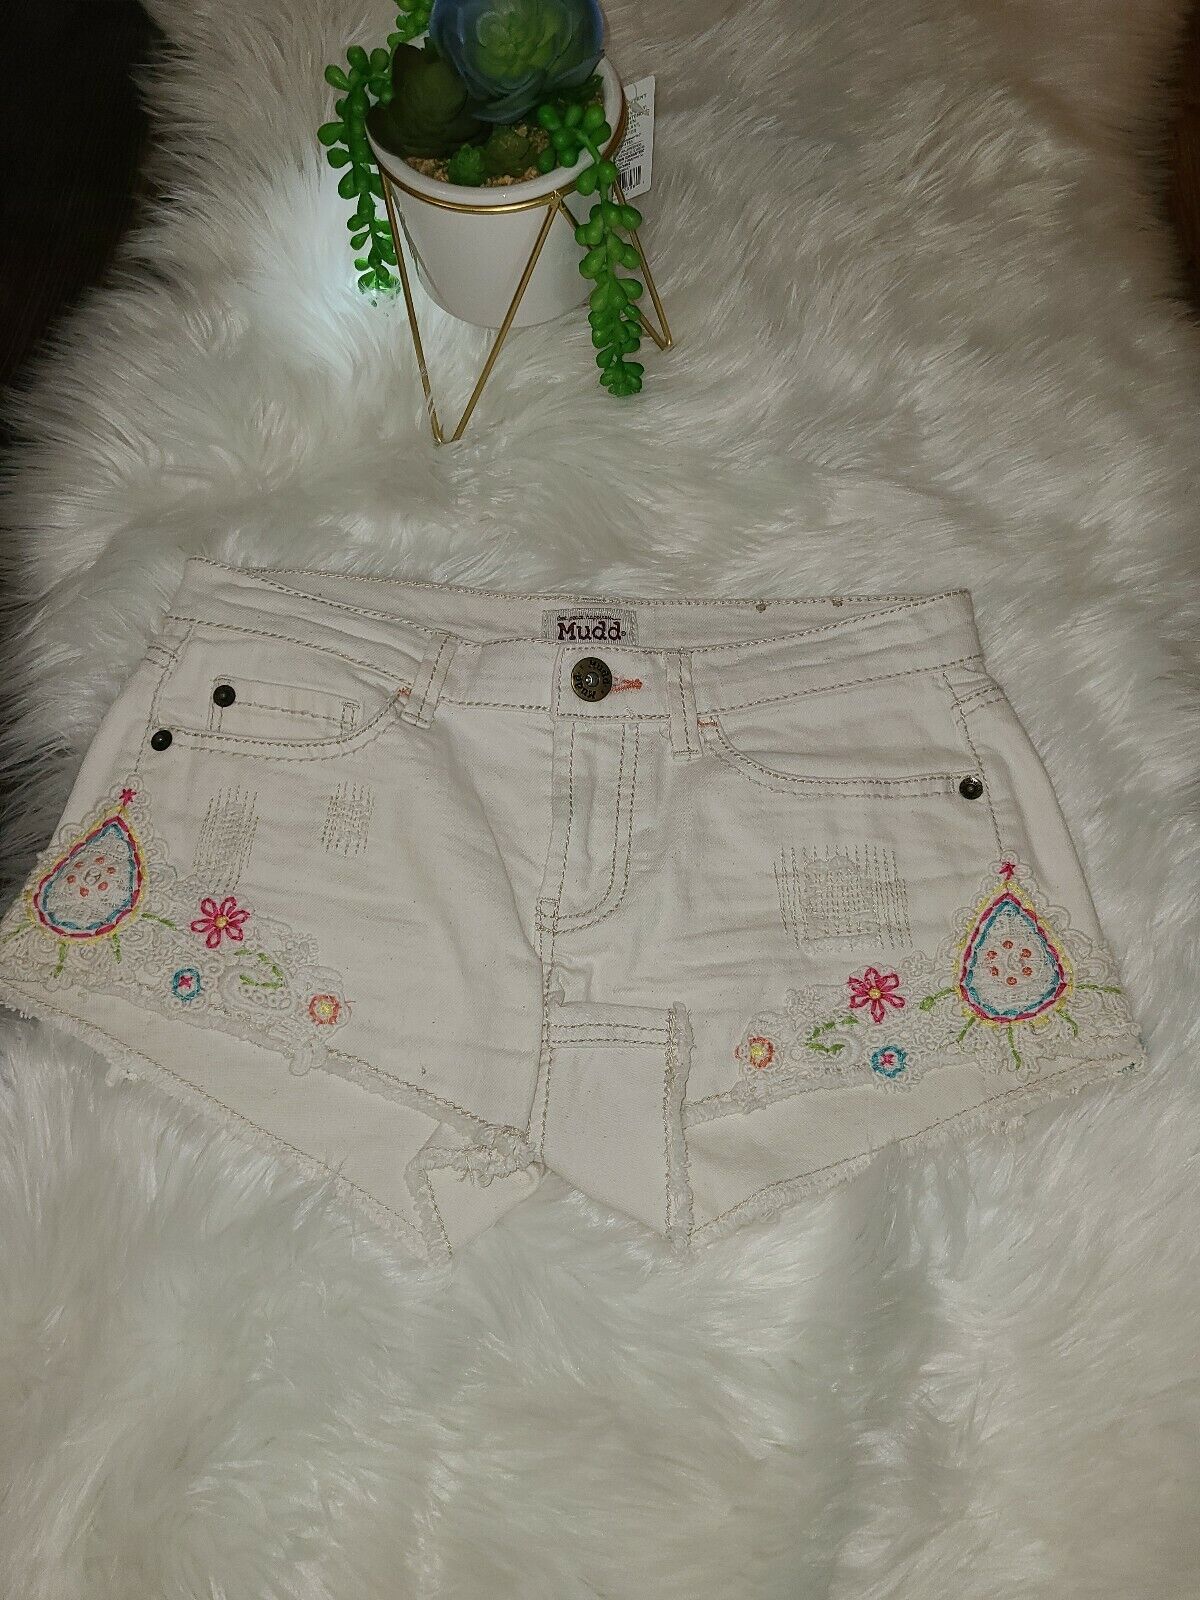 Mudd Jean Shorts Juniors Size 5 Cream Color With … - image 2